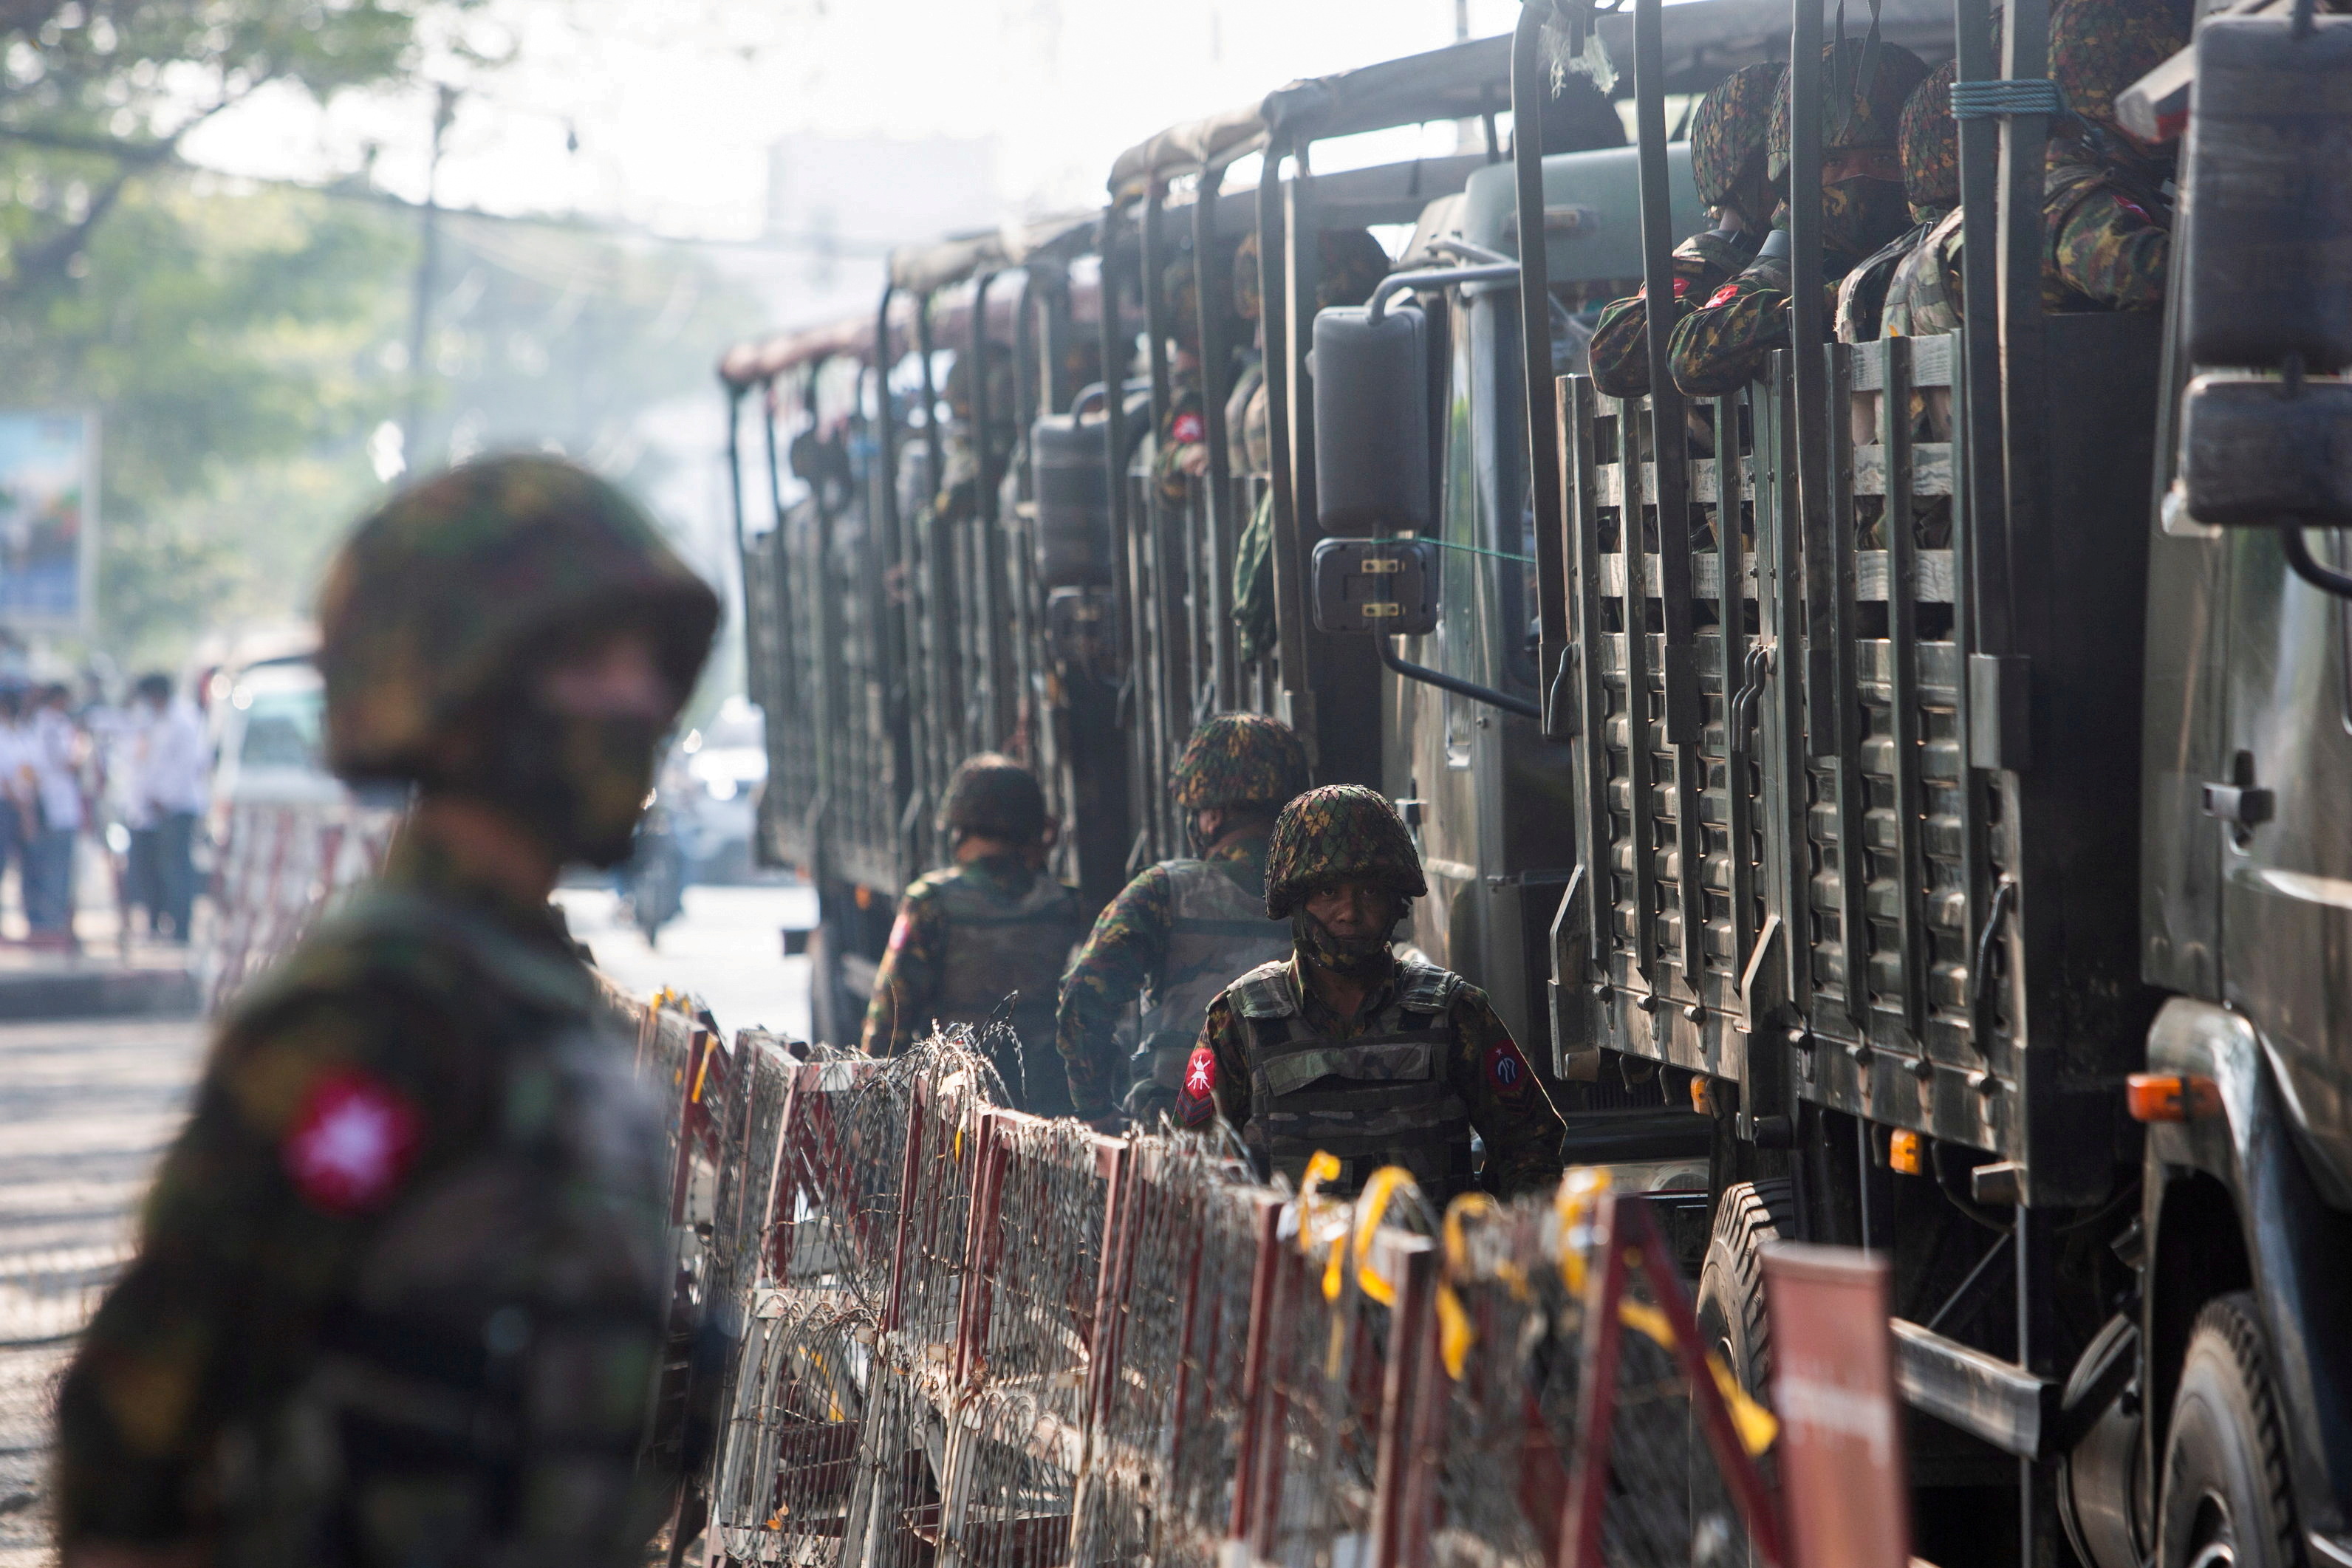 Soldiers stand next to military vehicles as people gather to protest against the military coup, in Yangon, Myanmar, February 15, 2021. REUTERS/Stringer/File Photo